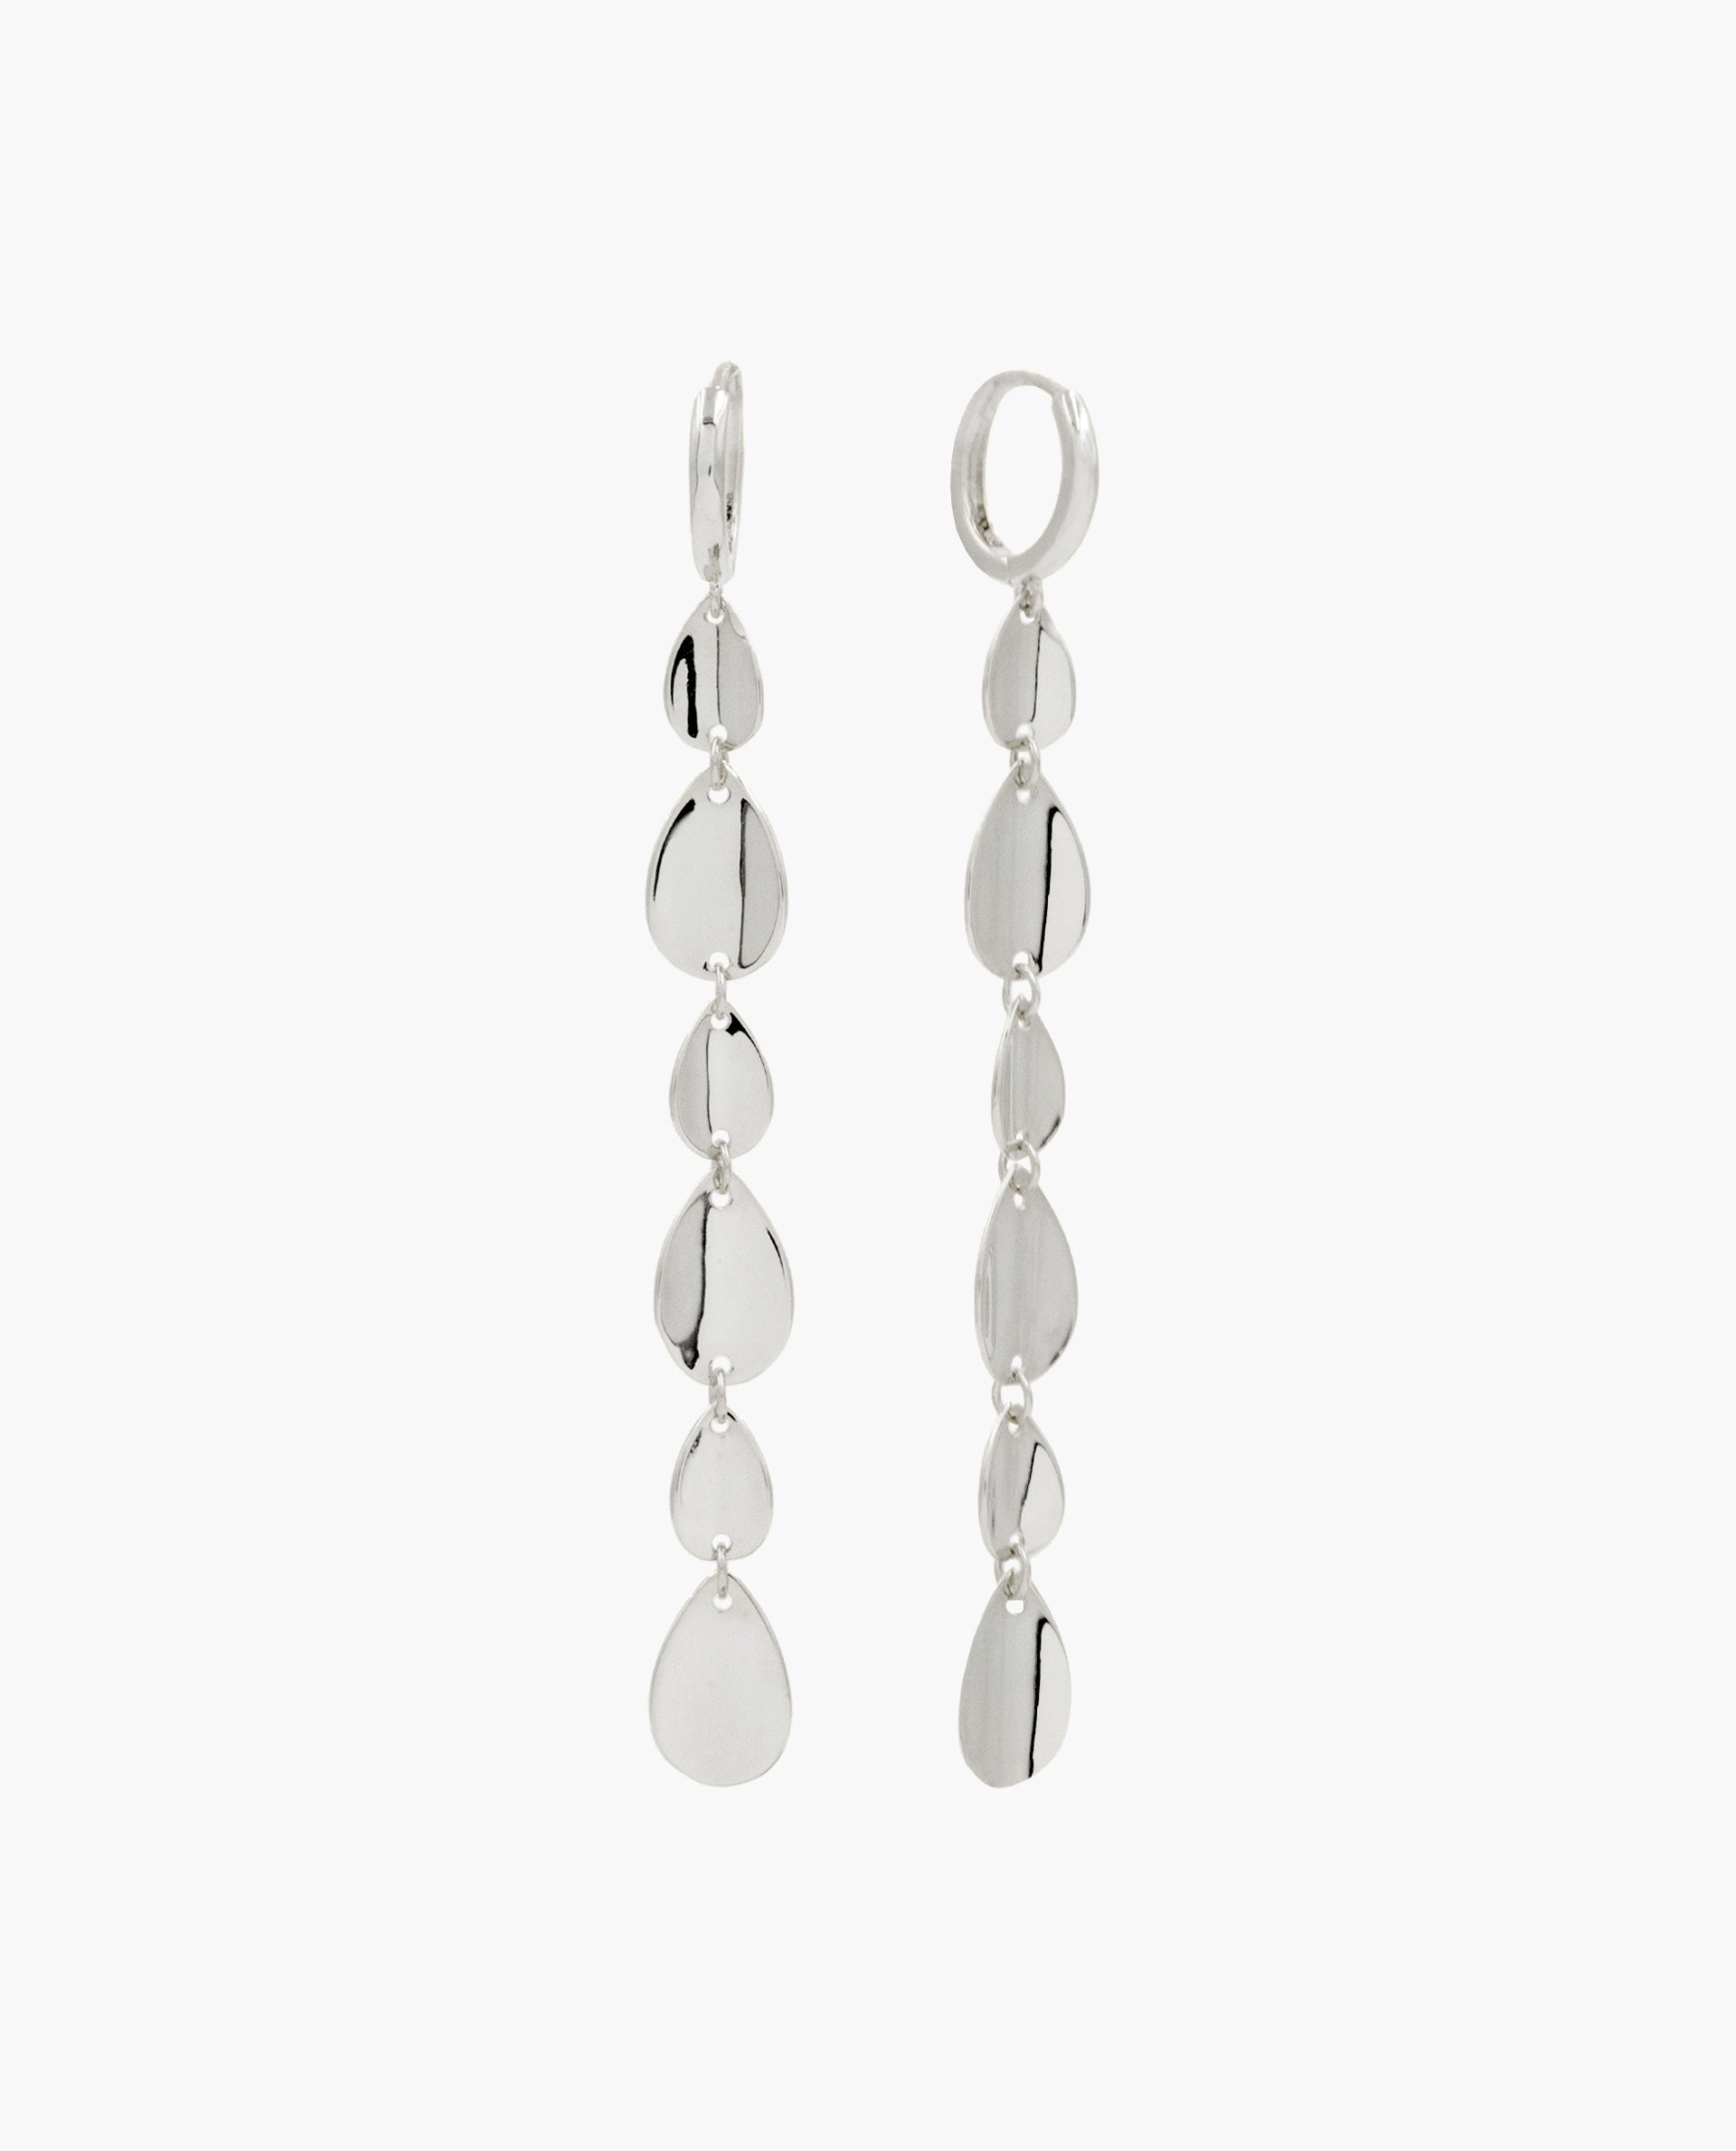 RAINDROPS EARRINGS - SILVER PLATED